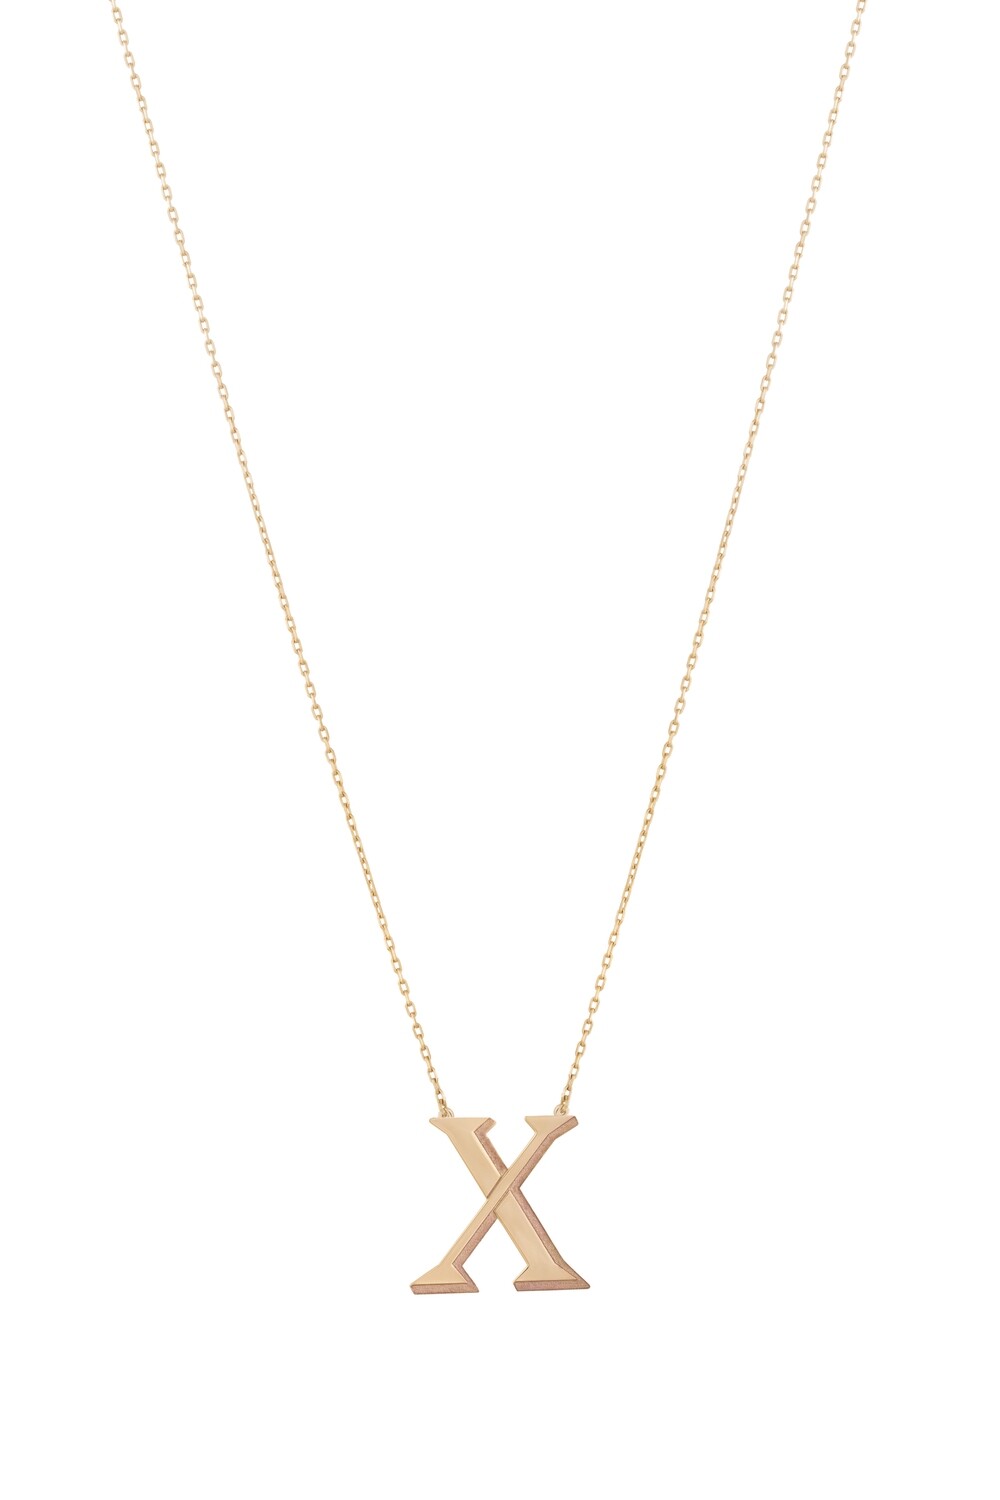 Initials Gold Necklace Letter X